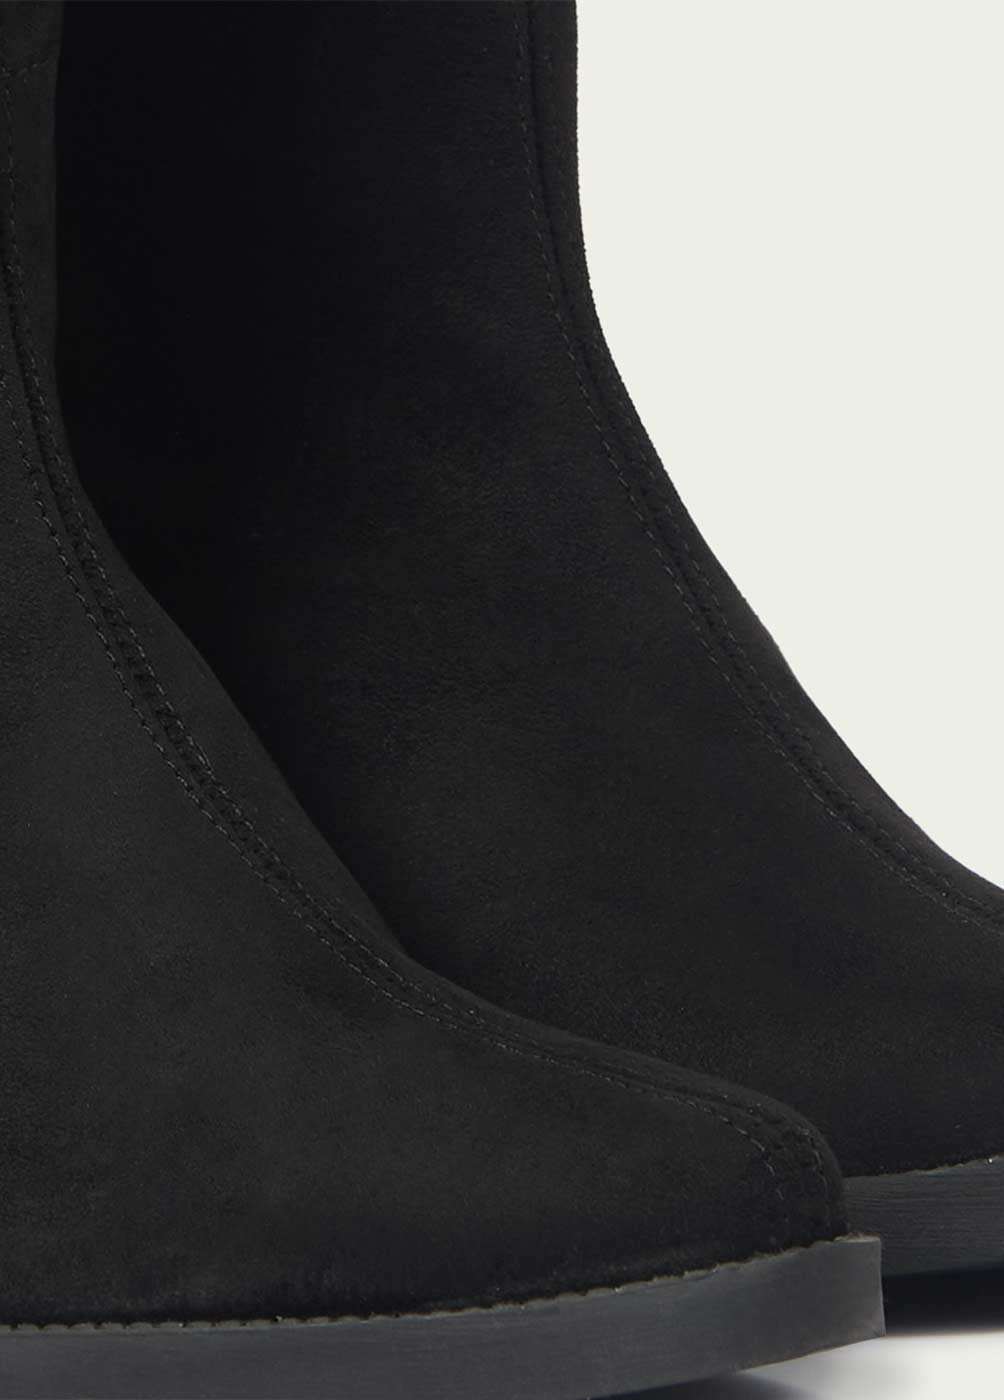 ELASTICATED WESTERN-STYLE BOOTS